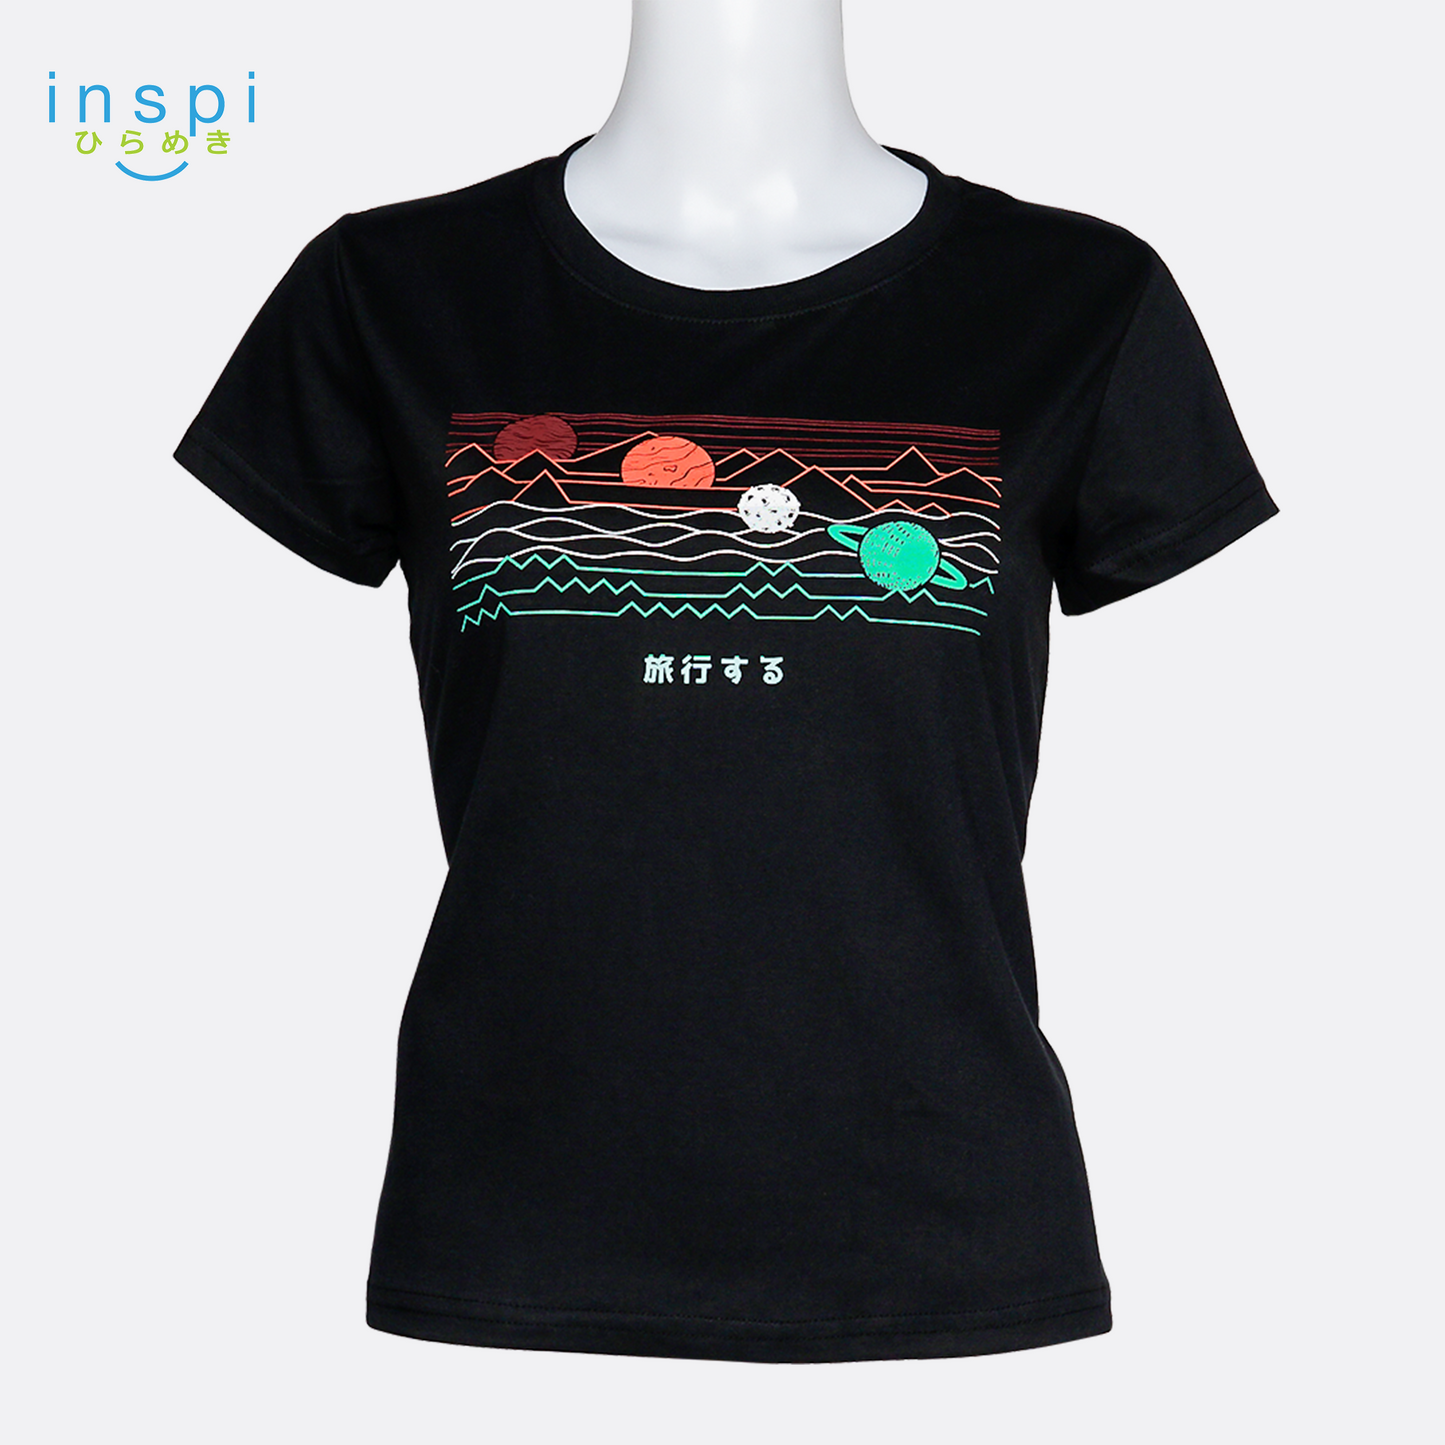 INSPI Tees Ladies Loose Fit Geometric Mountains Graphic